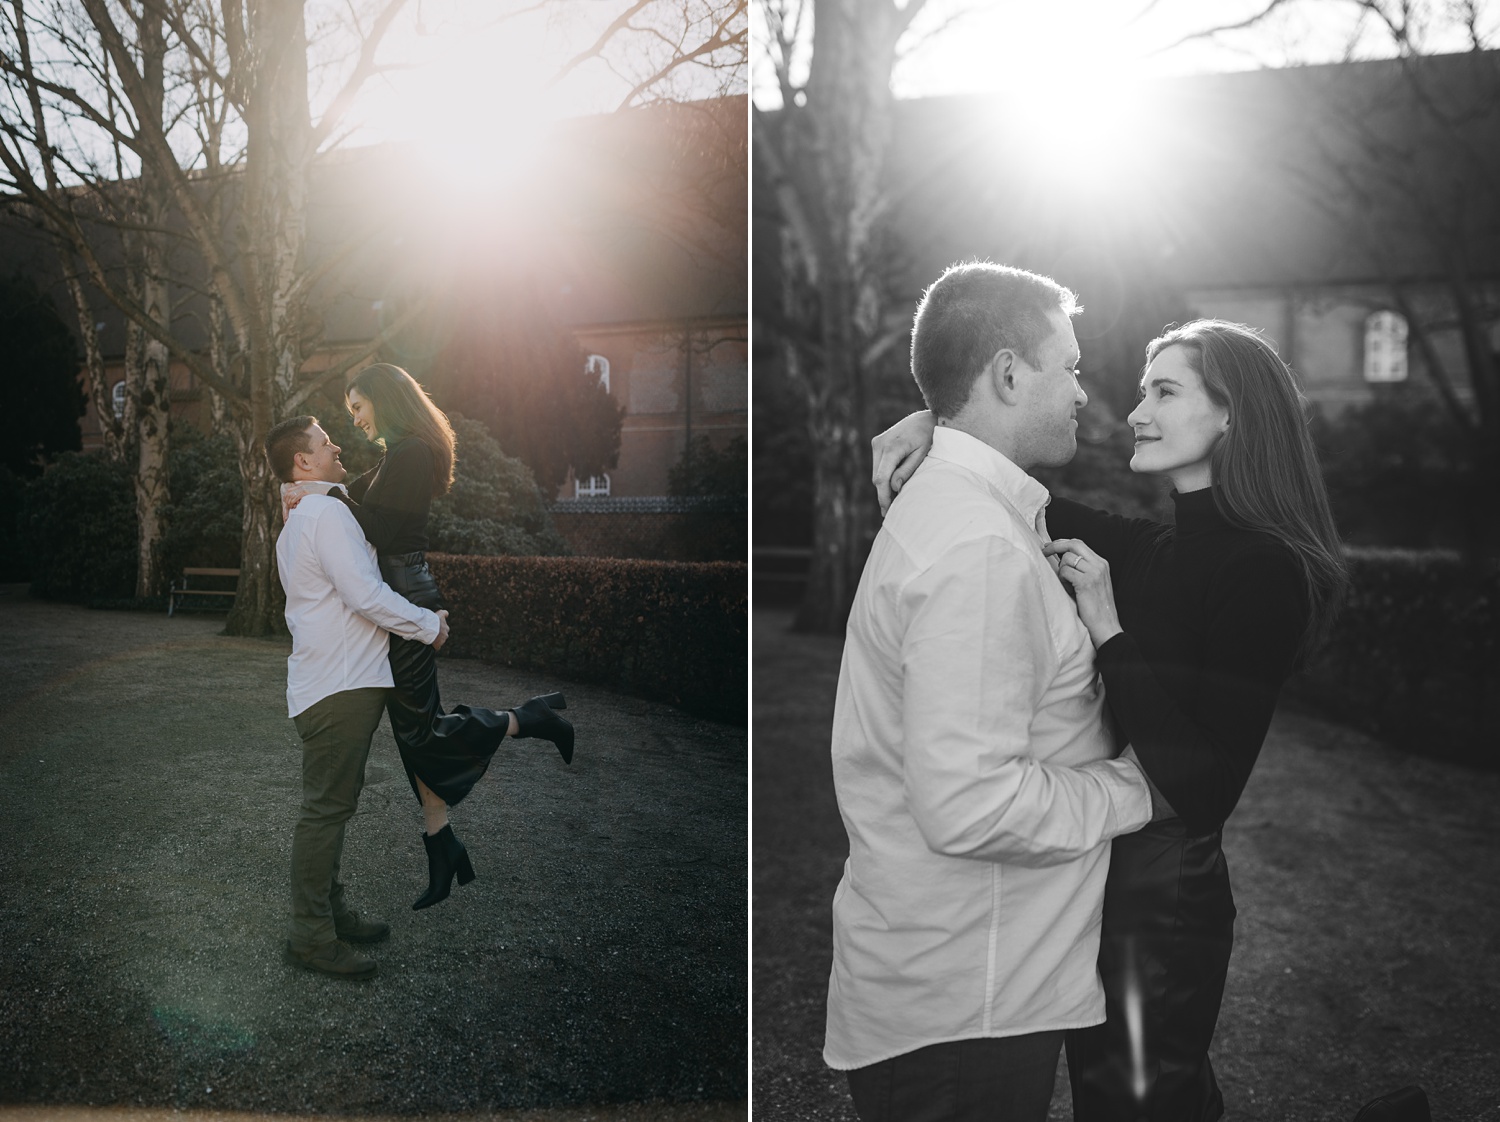 Dreamy engagement moments in Copenhagen, illuminated by soft backlight and romantic flare